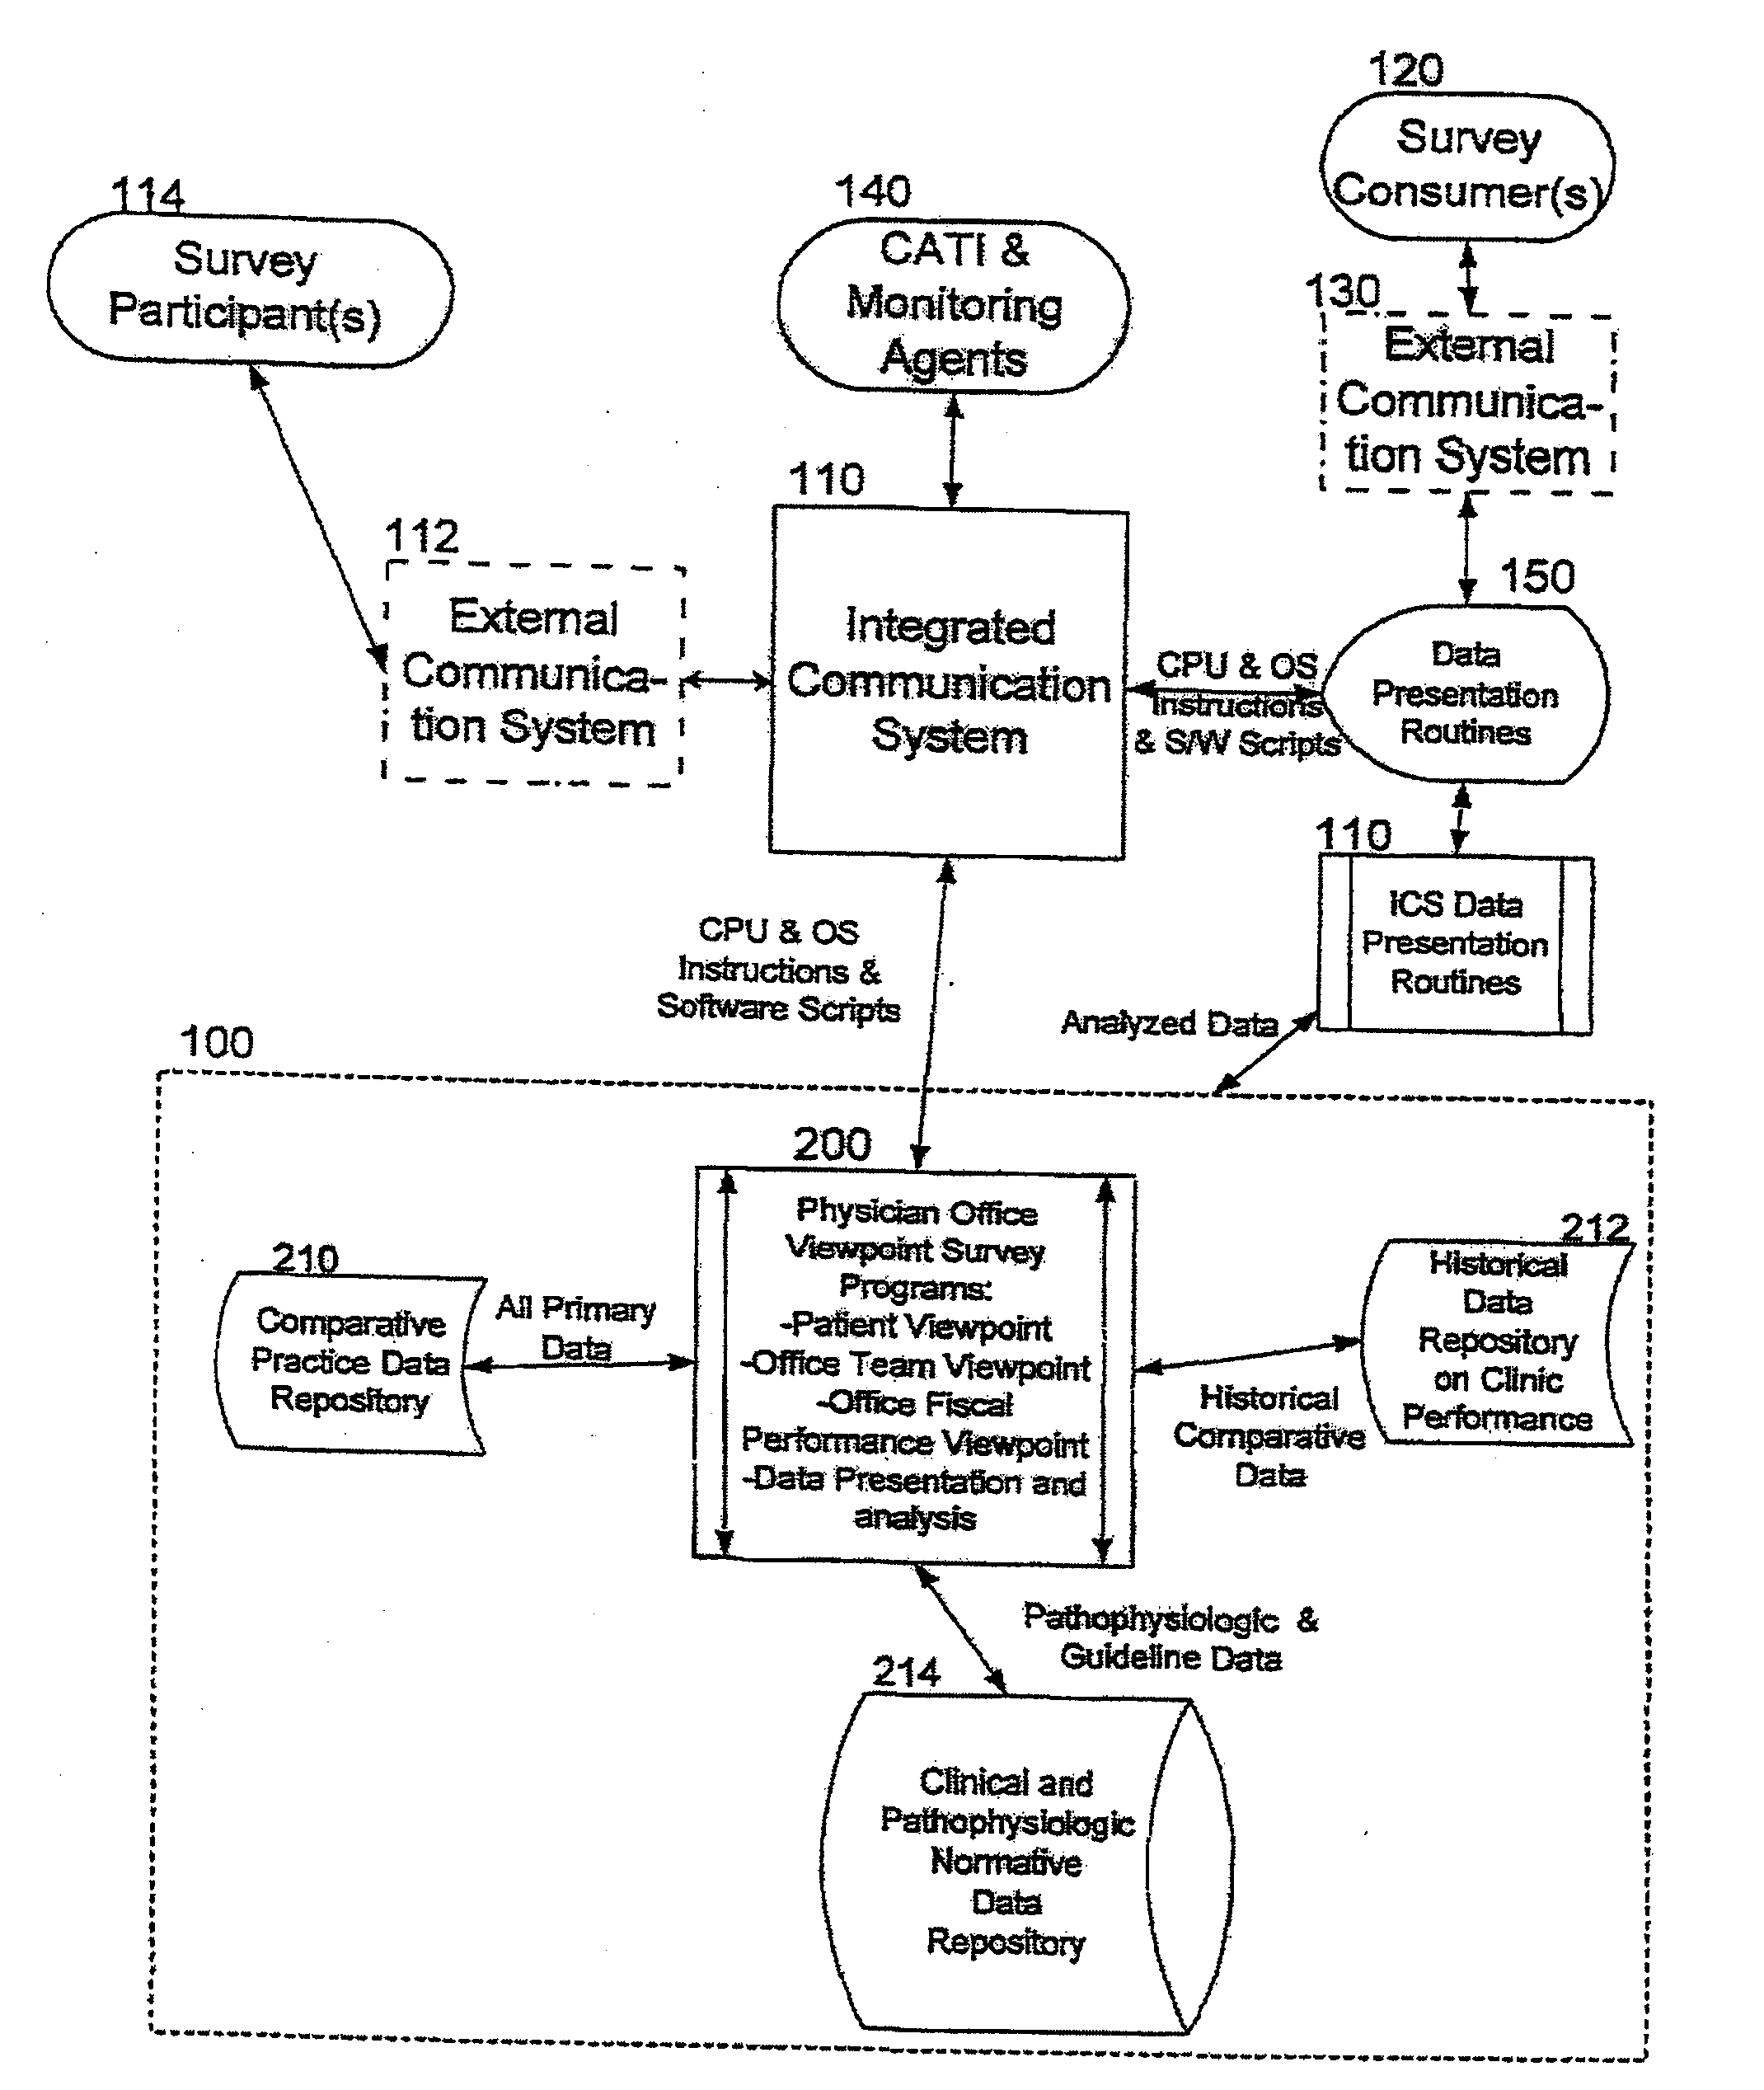 Physician office viewpoint survey system and method